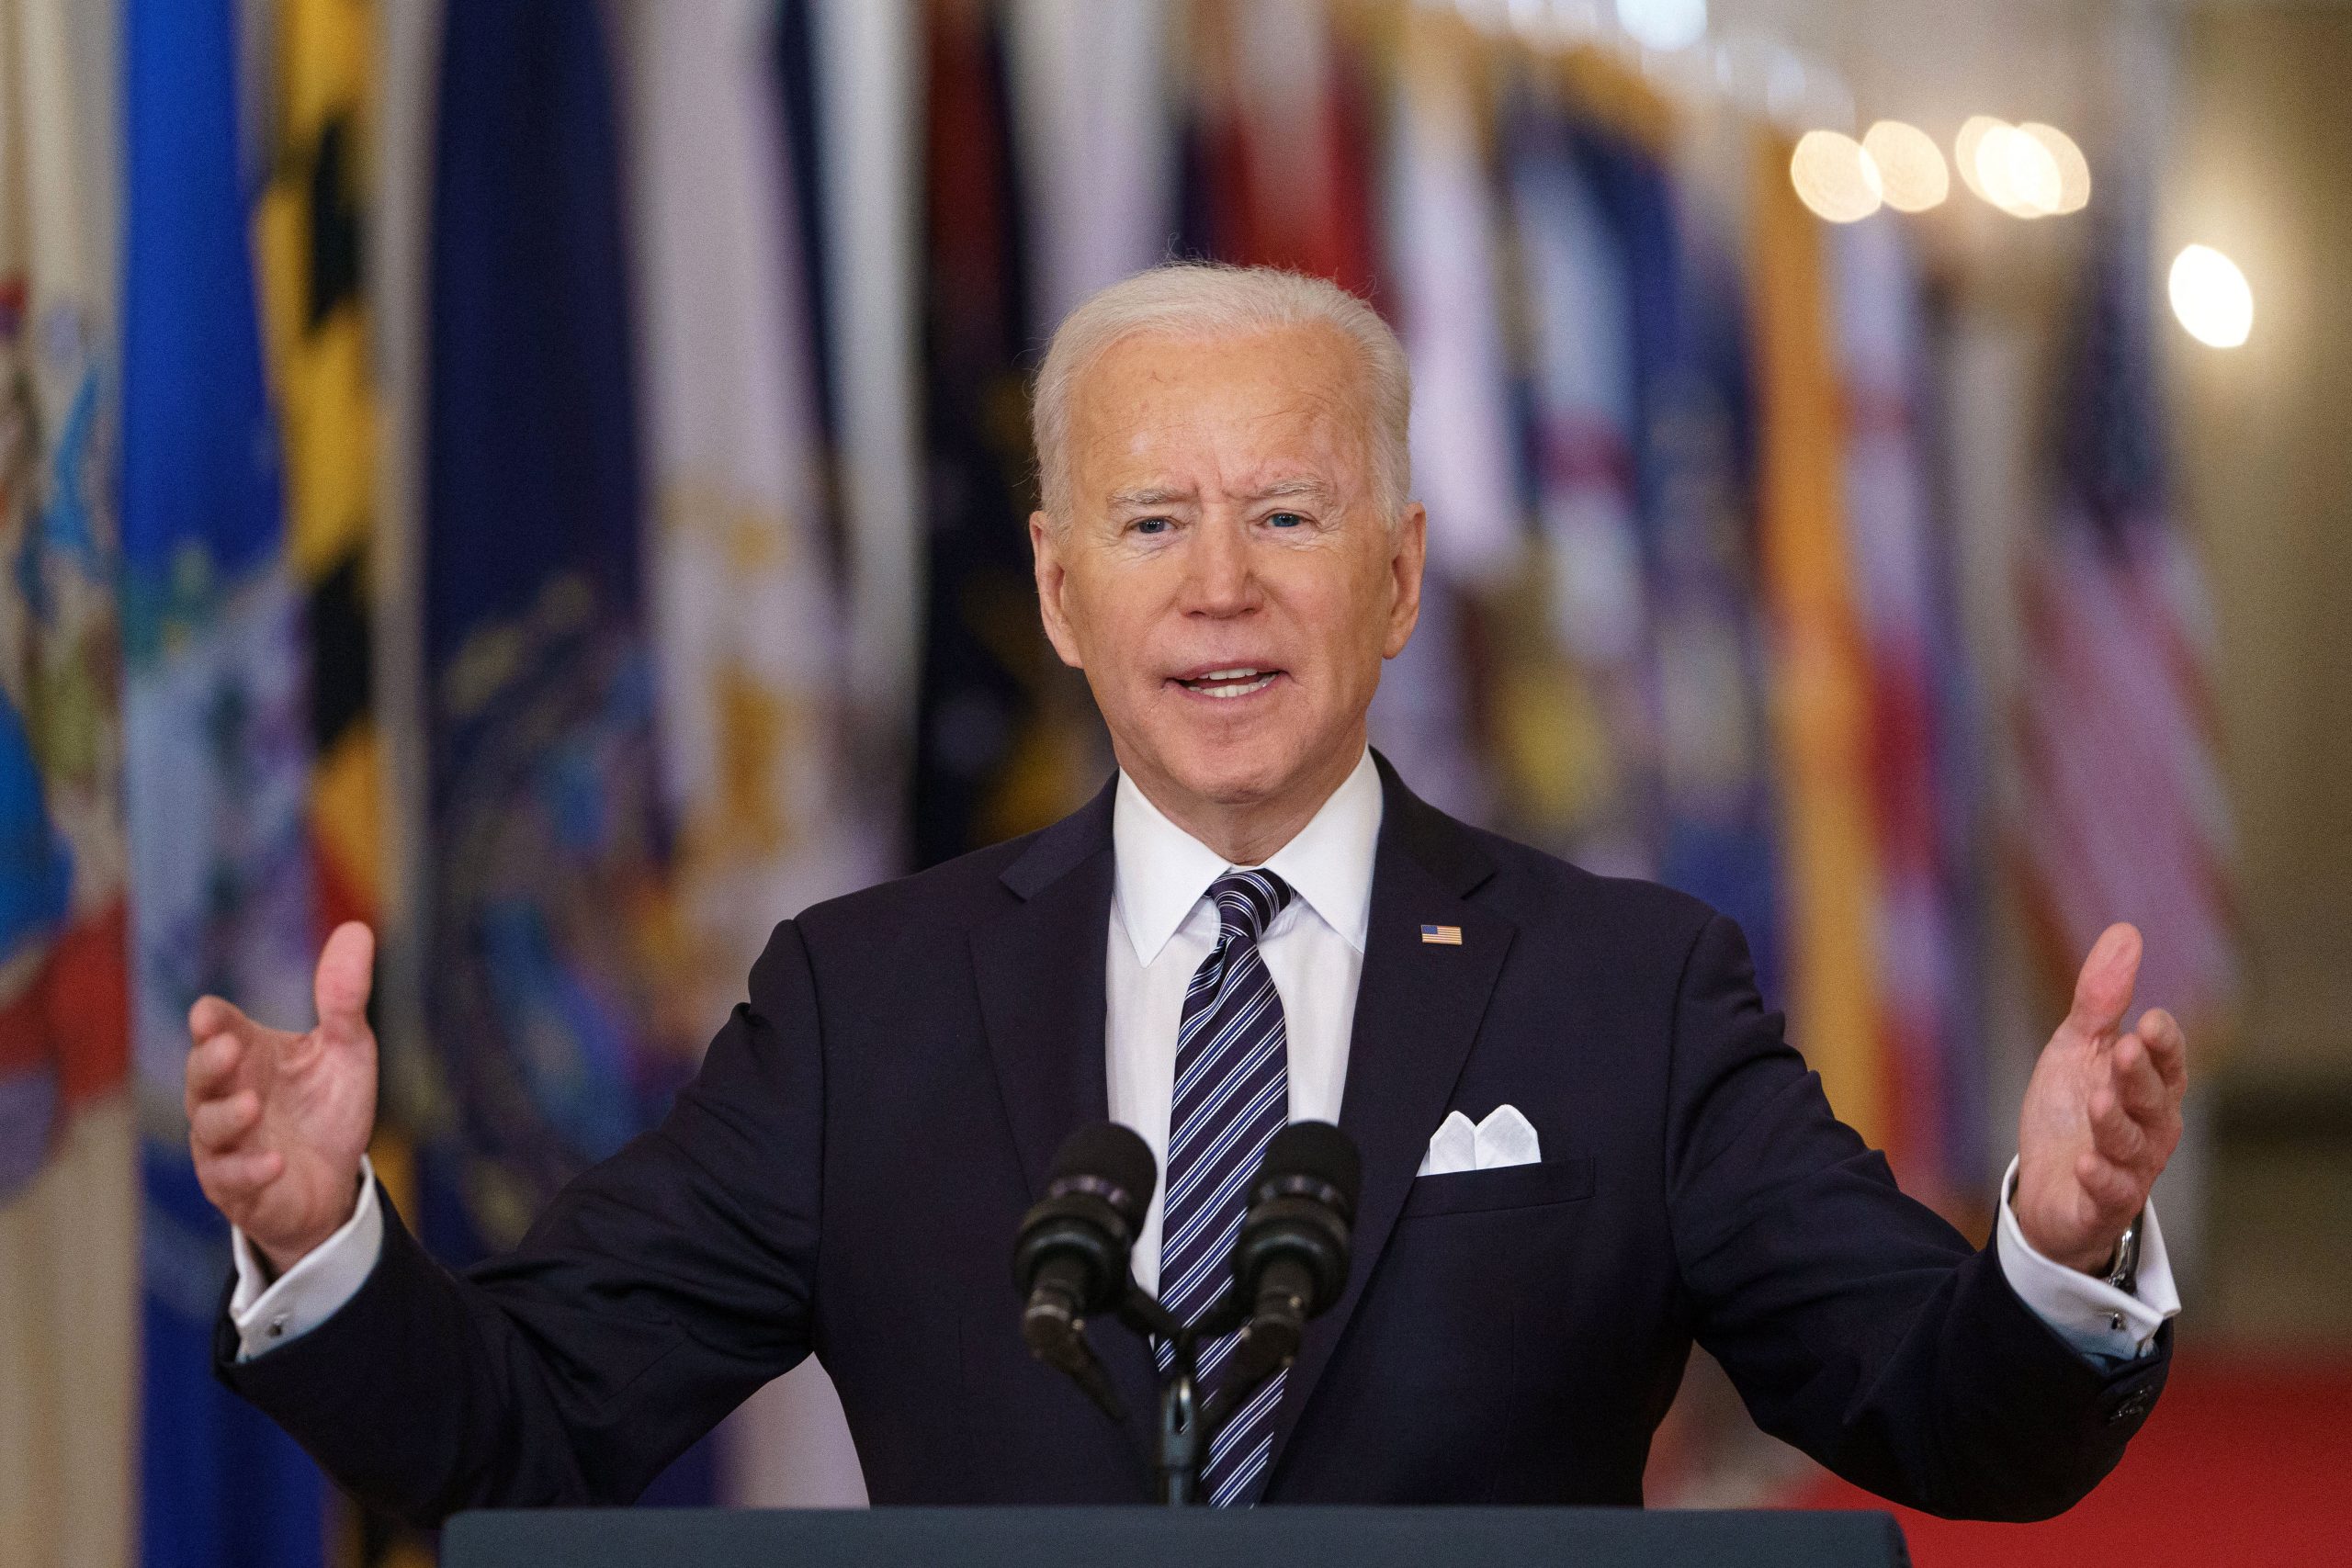 Joe Biden says he plans to run for reelection in 2024